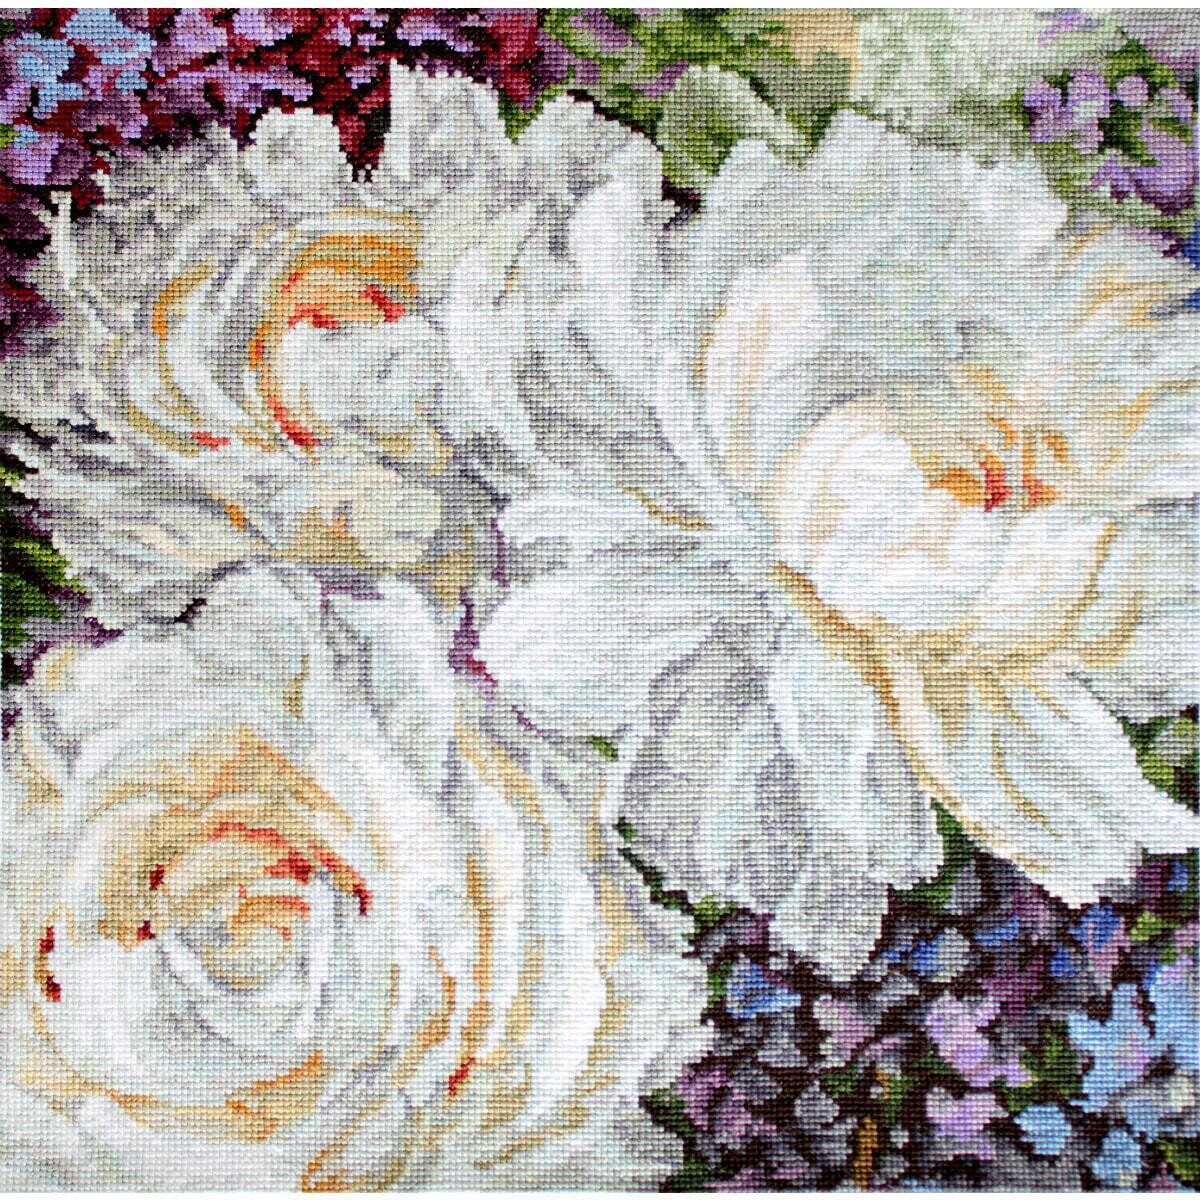 A vibrant cross stitch embroidery by Letistitch...